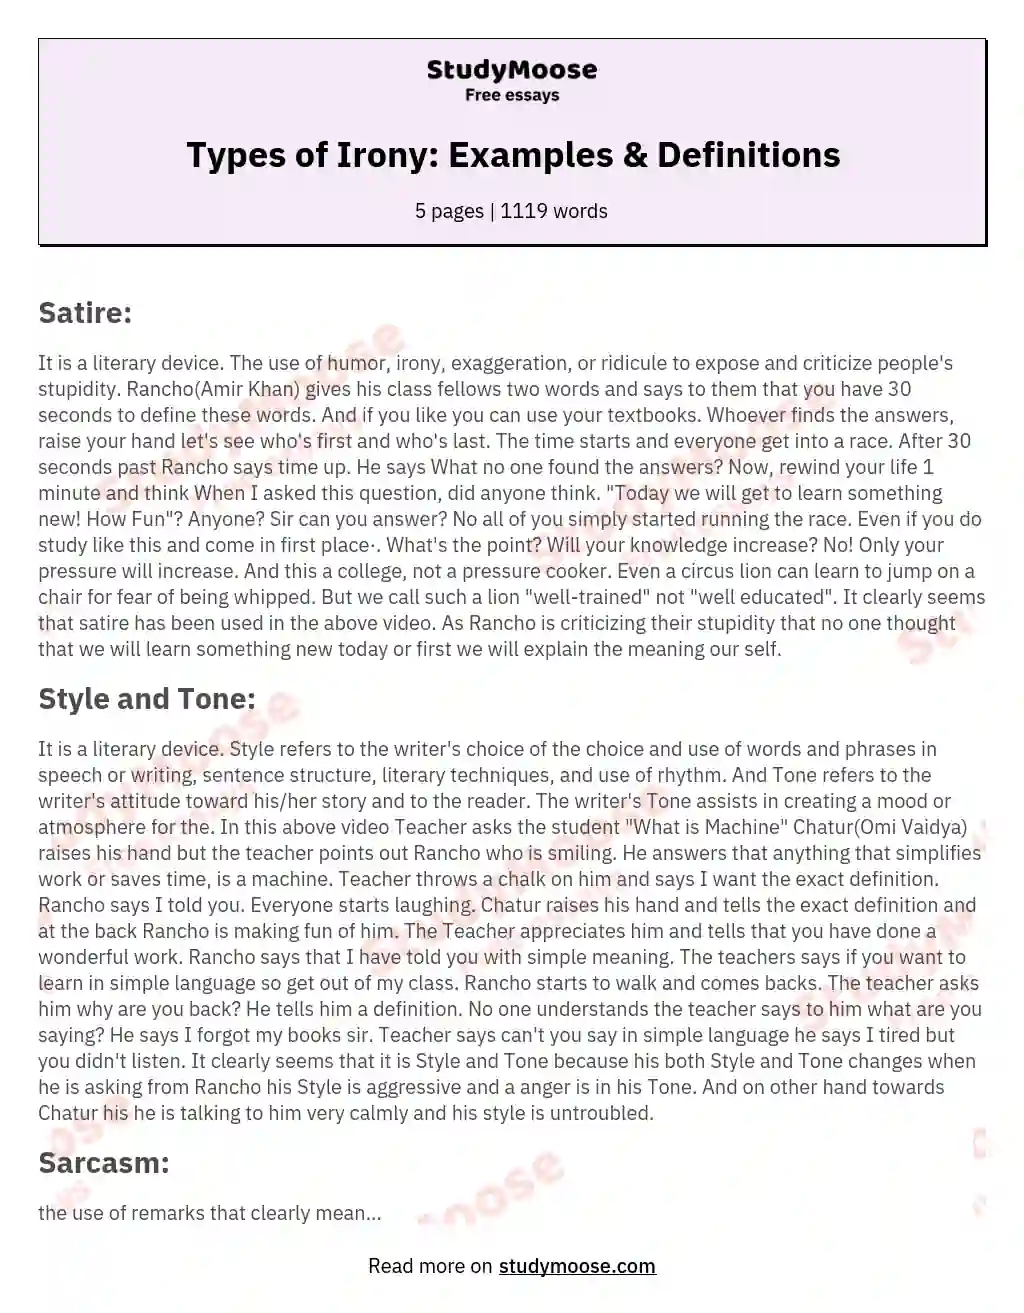 Types of Irony: Examples & Definitions essay